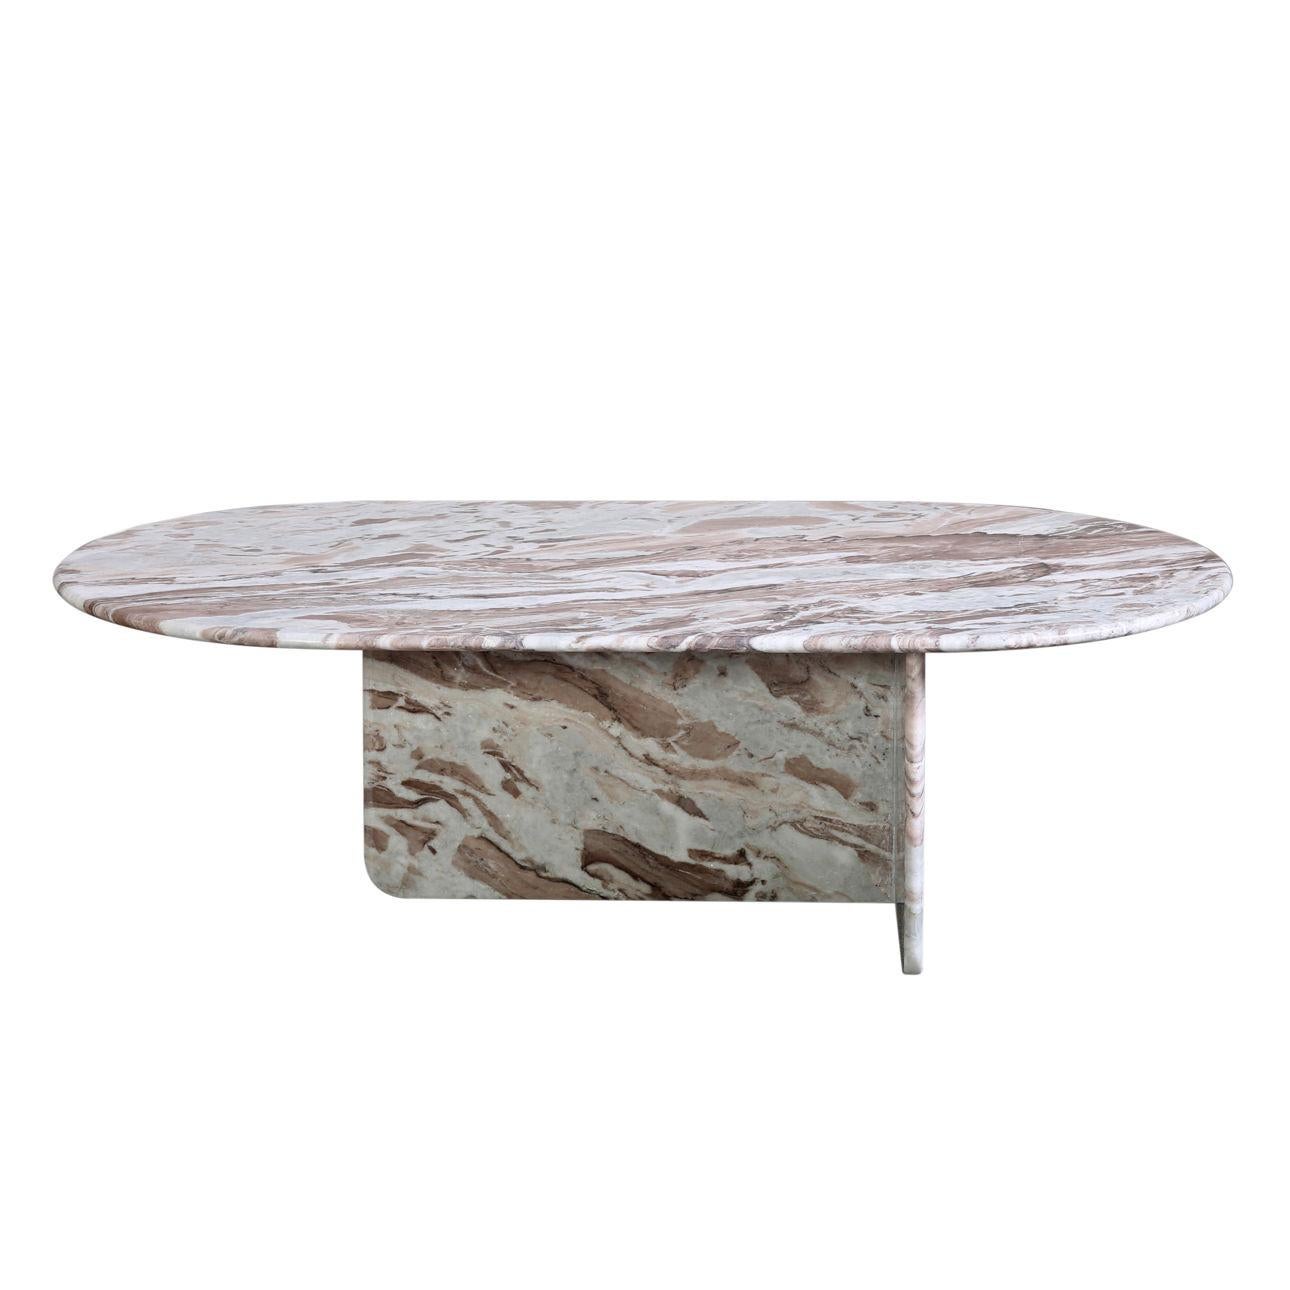 This solid Marble Oval Coffee Table is a sophisticated and timeless addition to any living space. Its modernity is emphasized by its uniquely asymmetric T-shaped base but the table remains organic through natural marble patterning. The table is